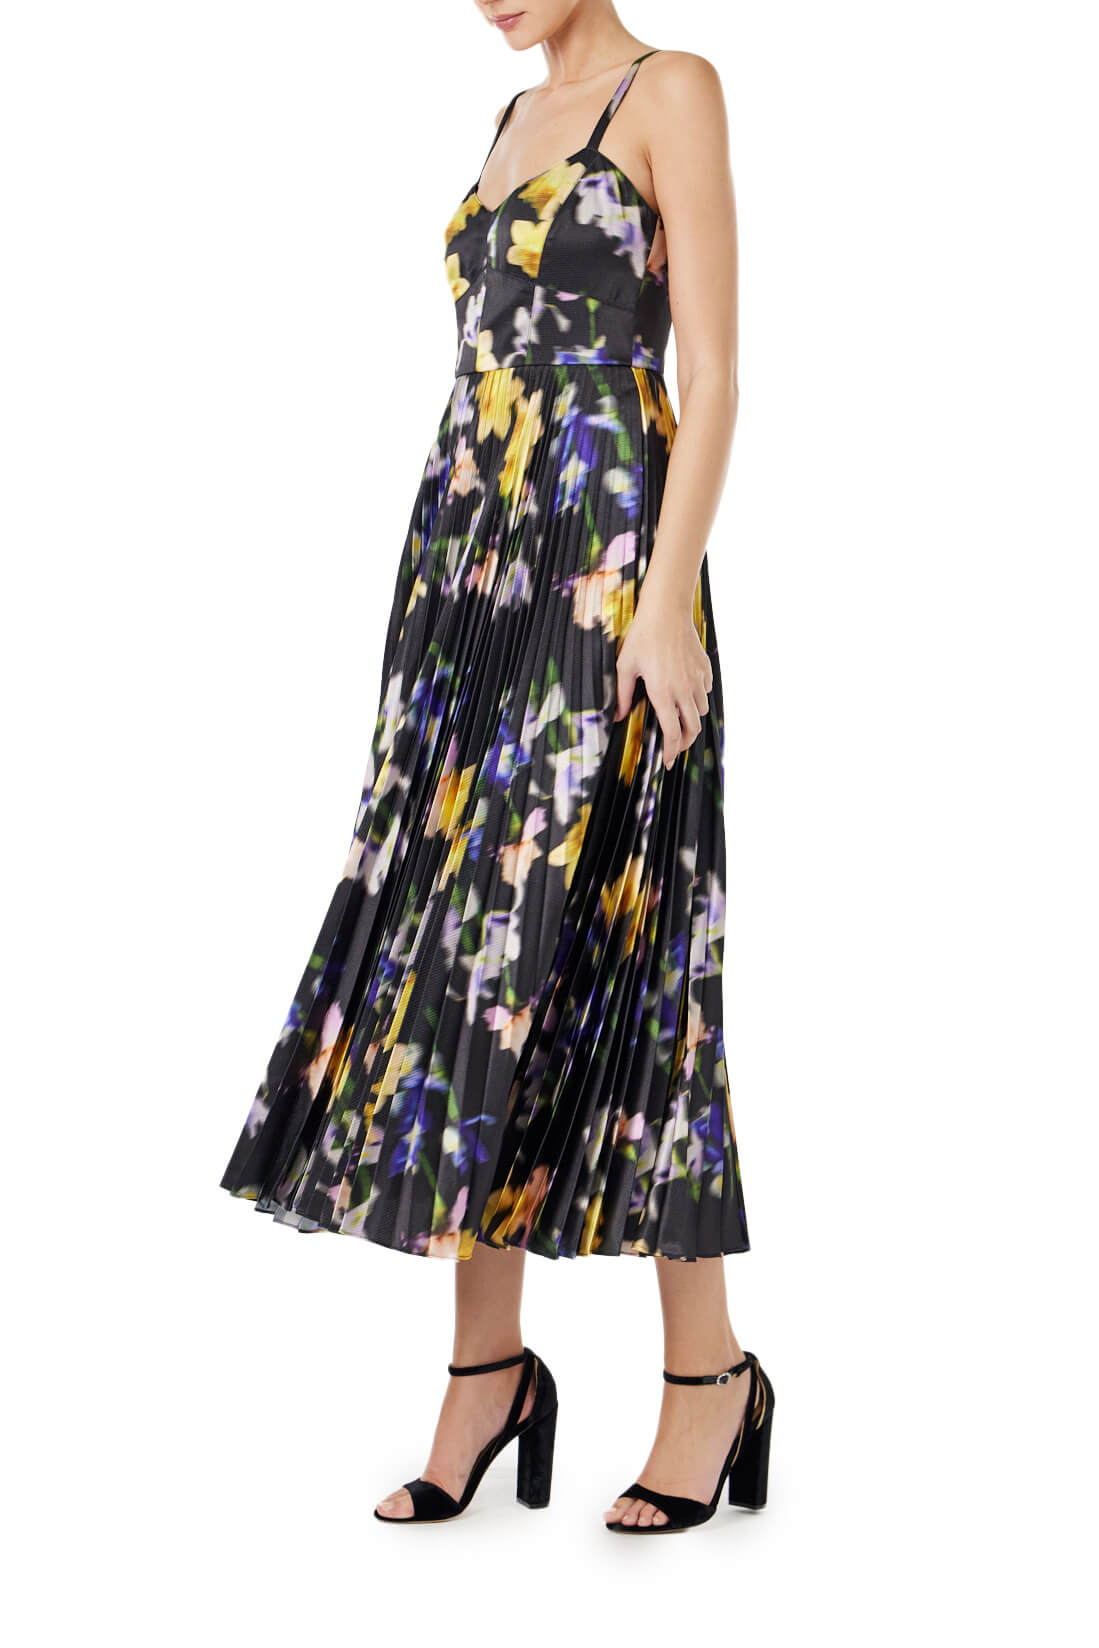 ML Monique Lhuillier  dark floral printed satin midi dress with thin straps and a pleated skirt.